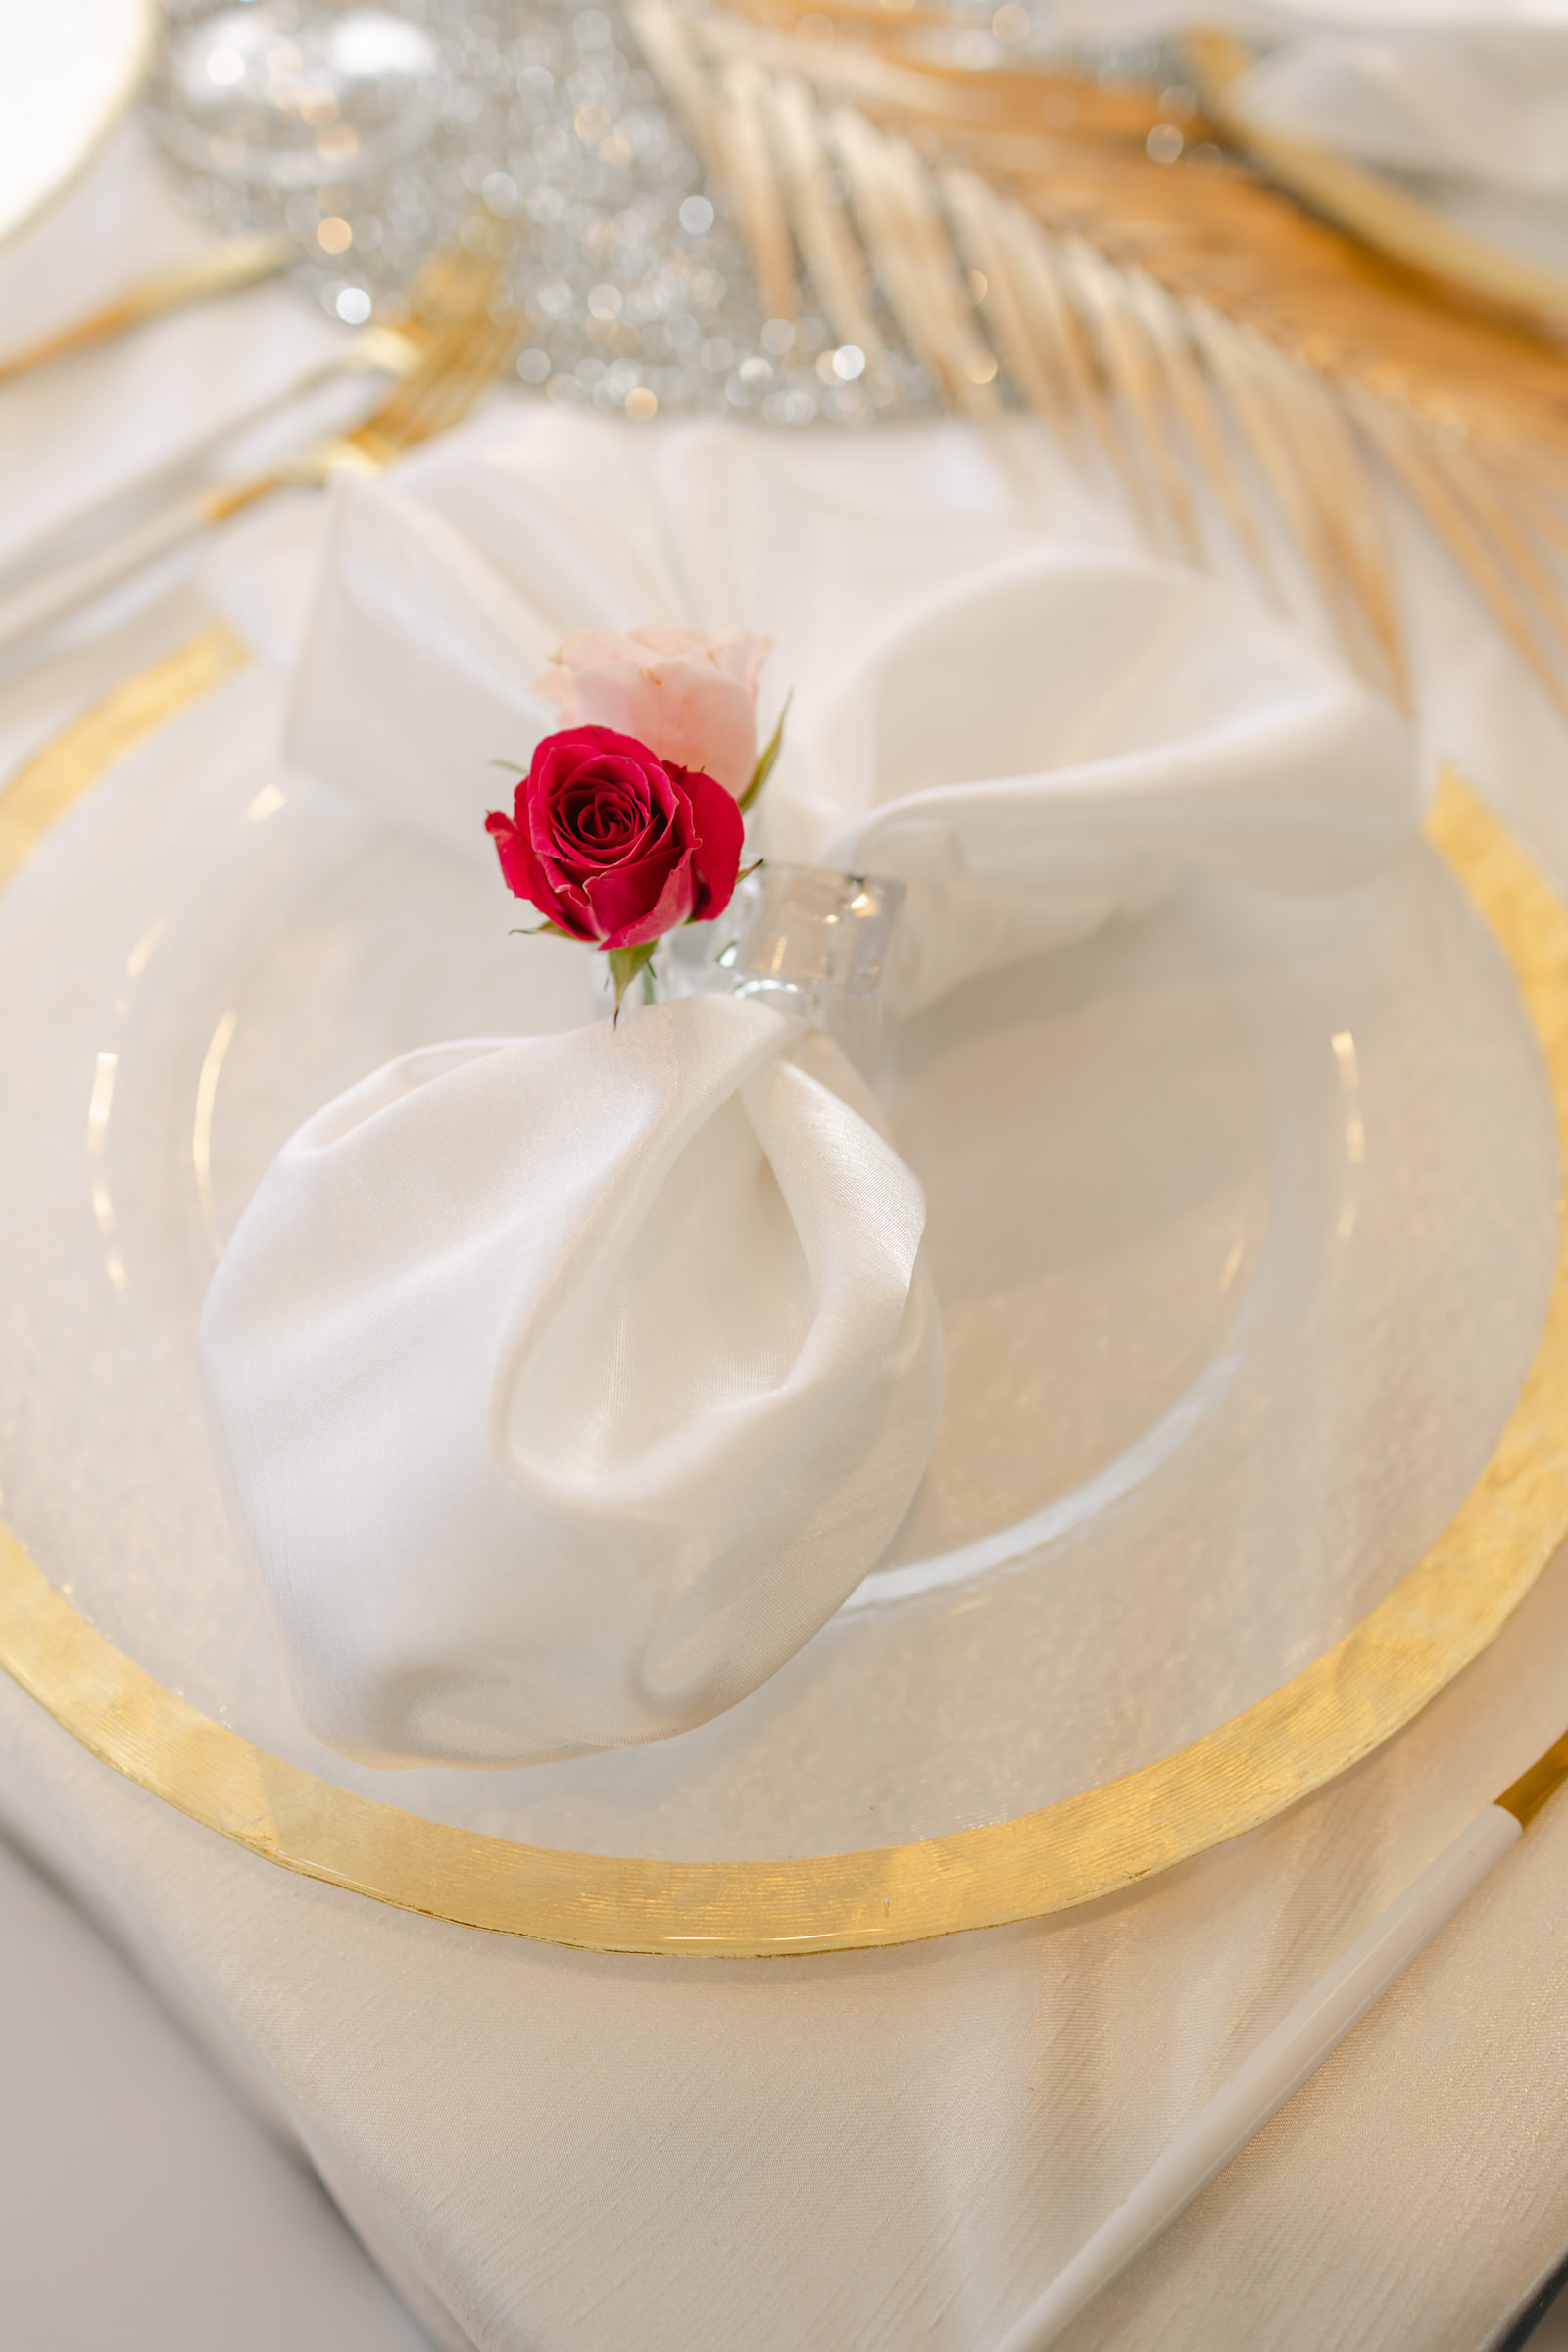 Modern Tropical Wedding Reception Decor, Gold Rimmed Charger, White Table Napkin with Red Rose Ring Holder | Tampa Bay Wedding Rentals Kate Ryan Event Rentals